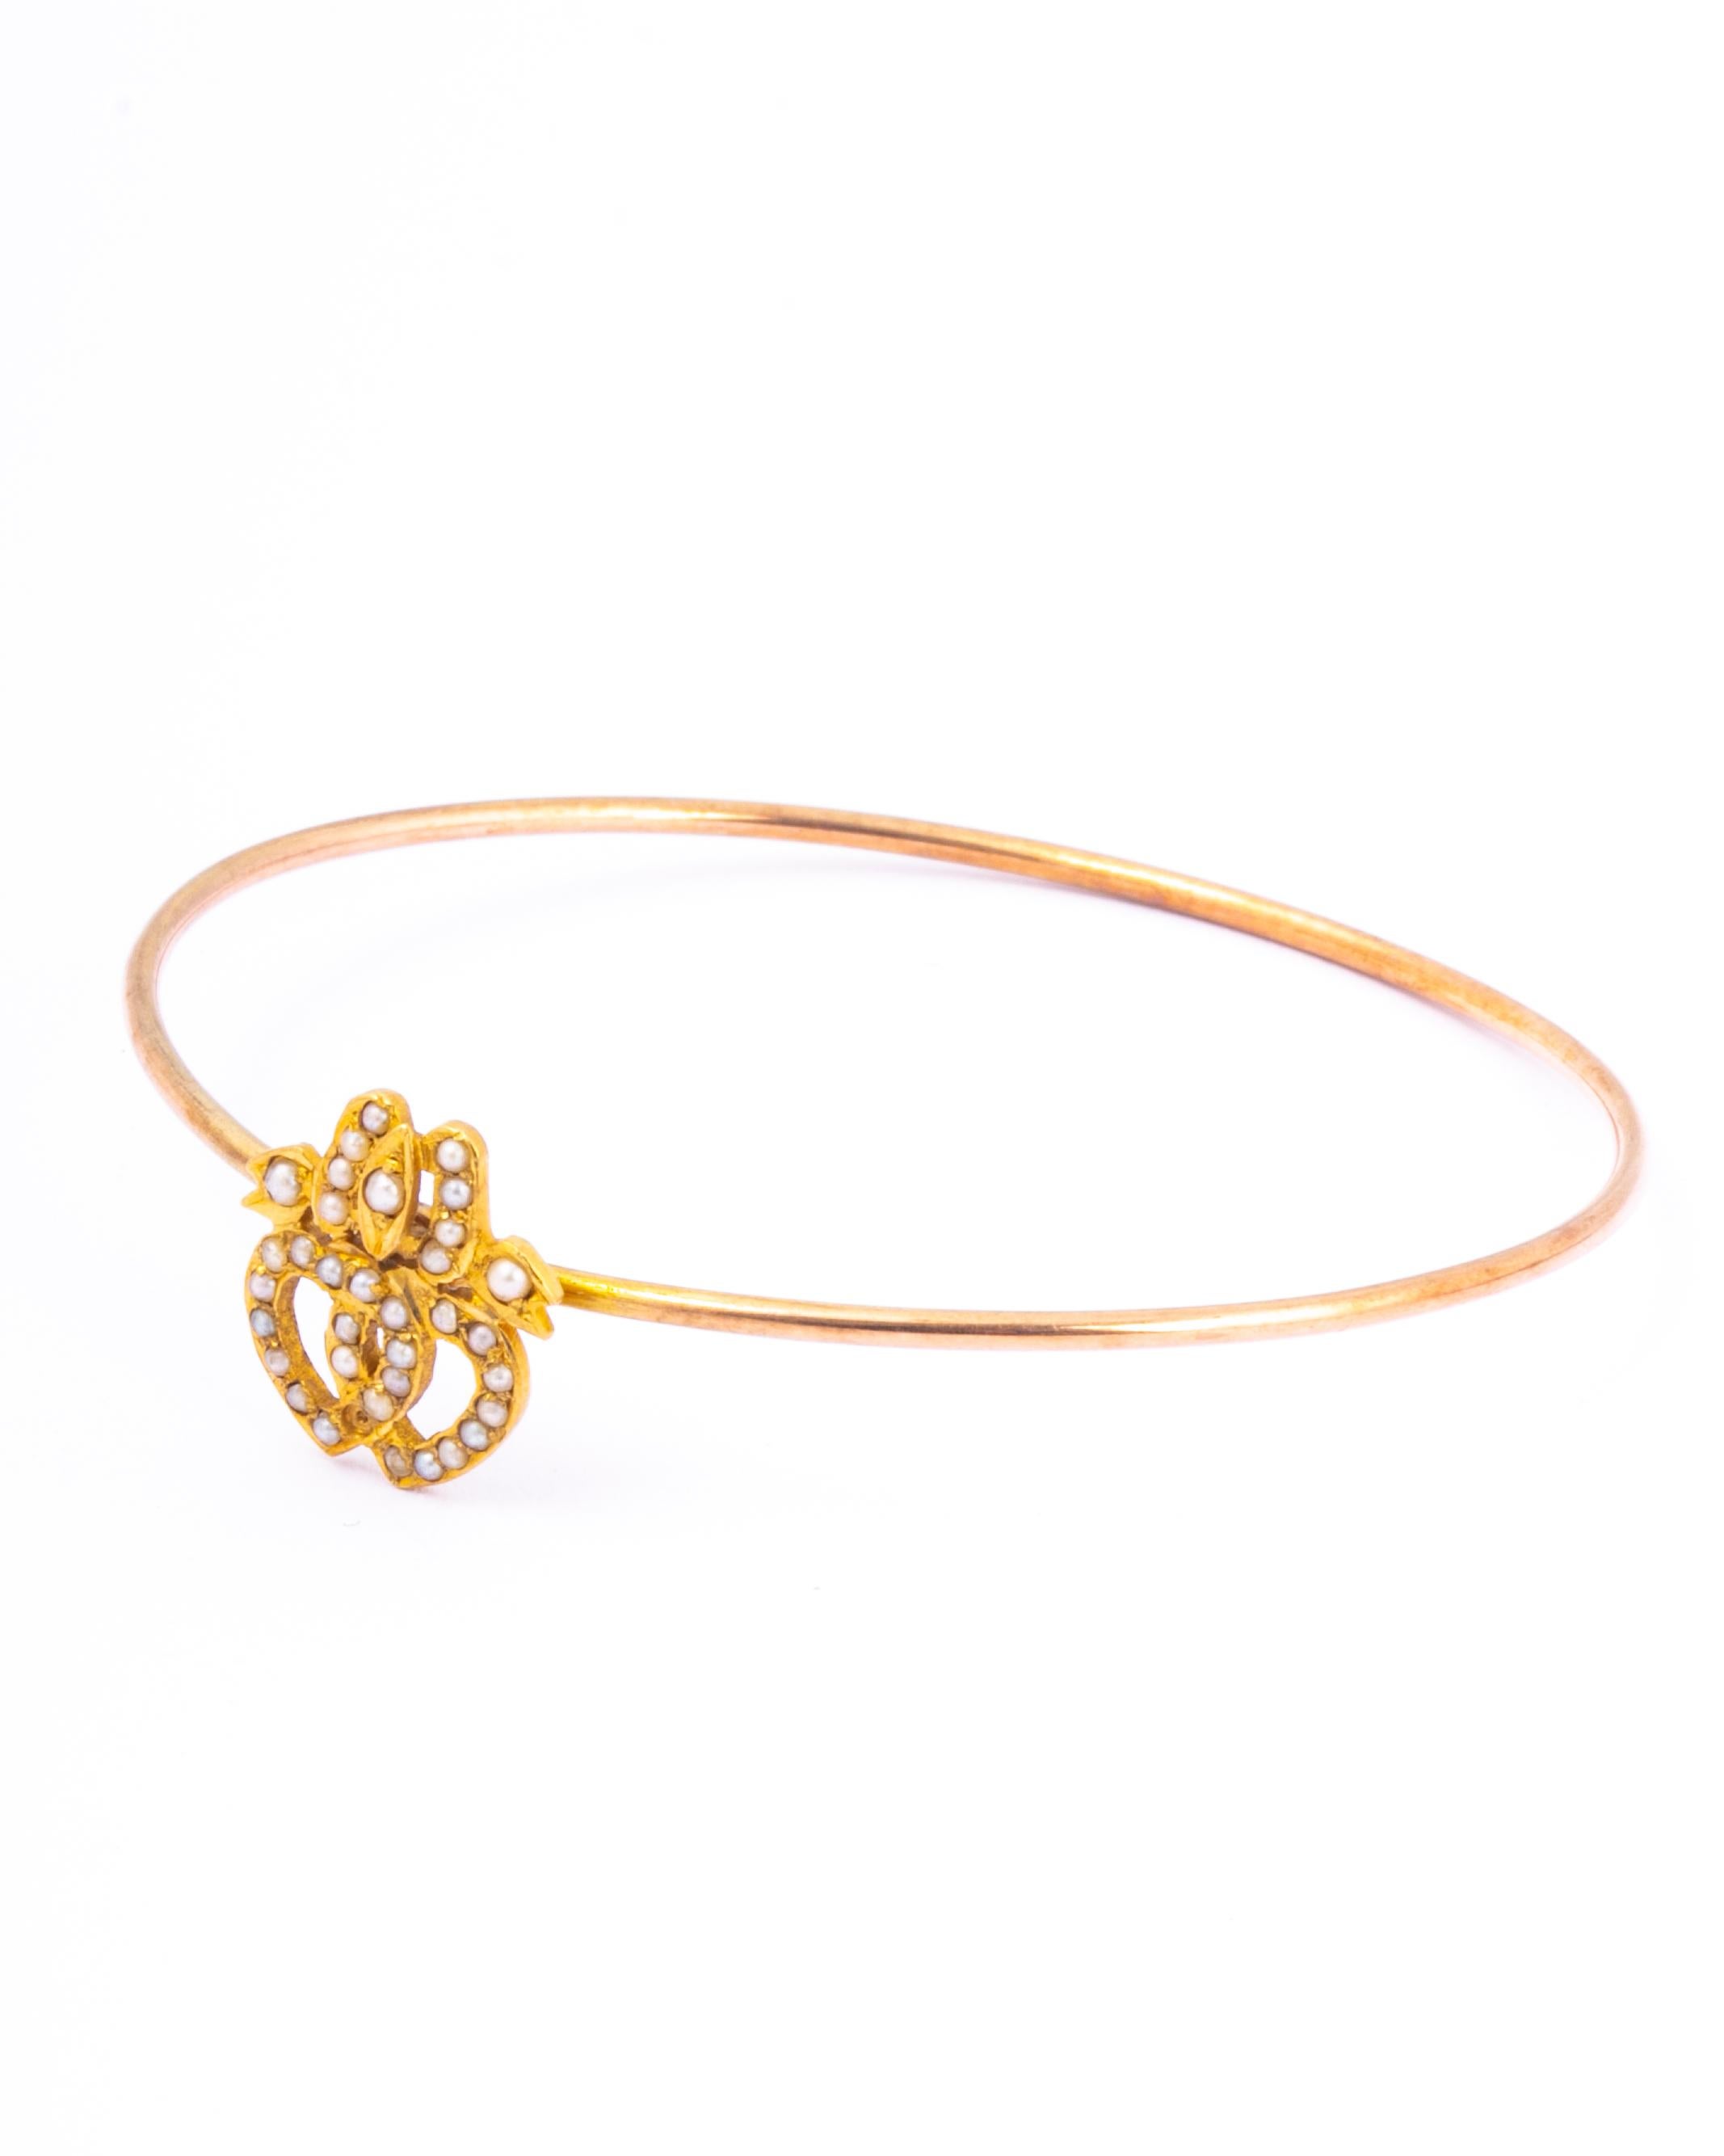 The 9 carat gold is bright and glossy and creates a classic style bangle. It fastens using a hook which hugs the double hearts. The hearts have seed pearls all the way around them with a bow above. 

Inner Diameter: 5.6cm
 
Weight: 5.35g

